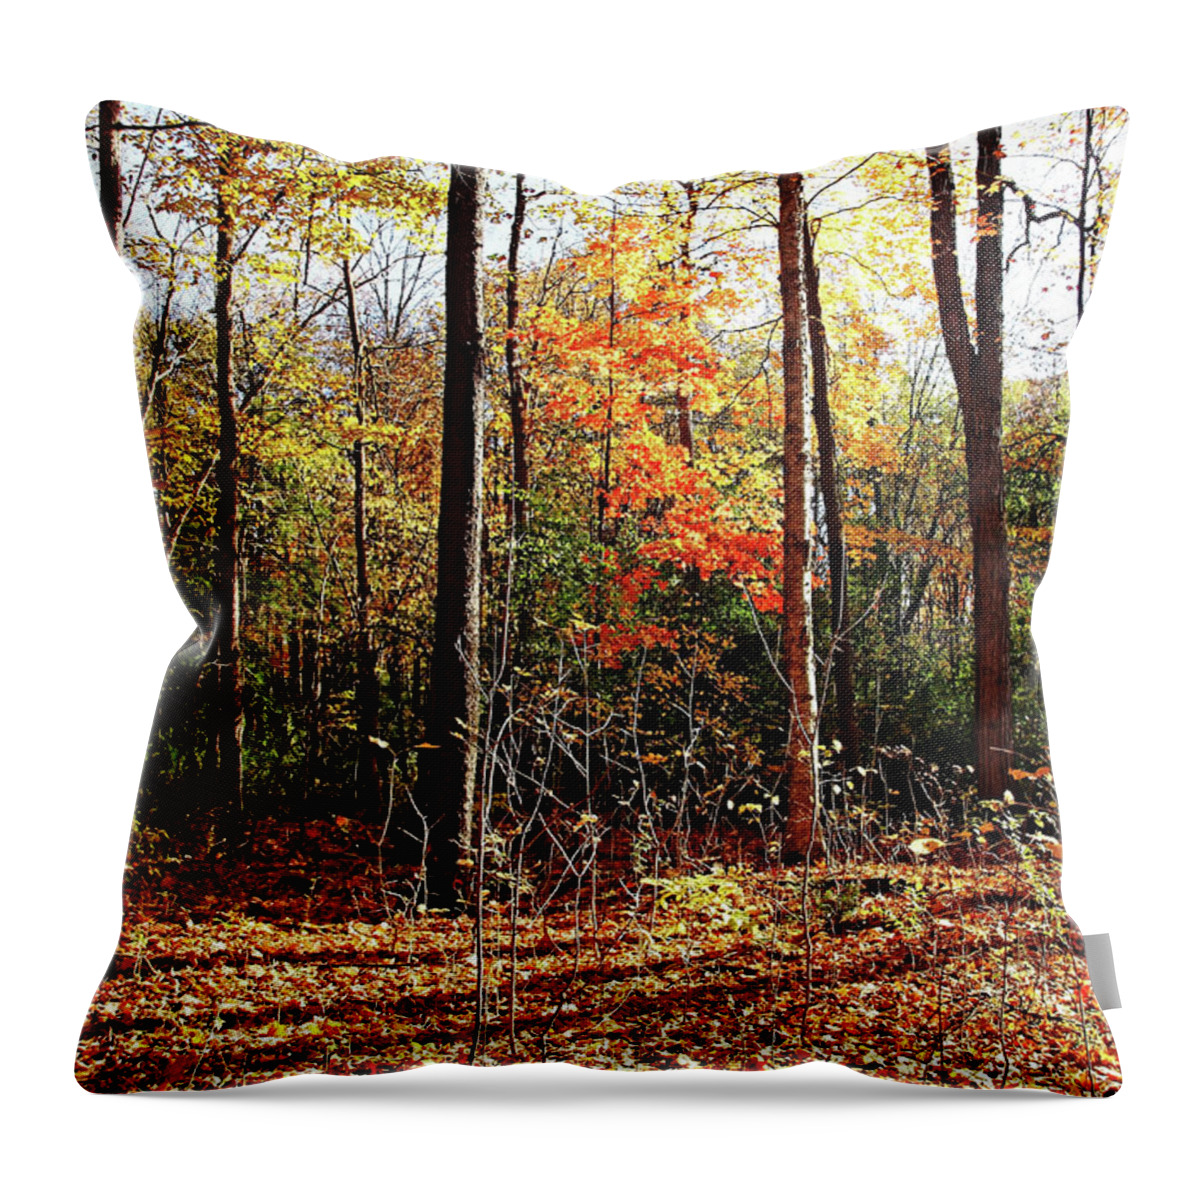 Autumn Throw Pillow featuring the photograph Let The Sun Shine In by Debbie Oppermann